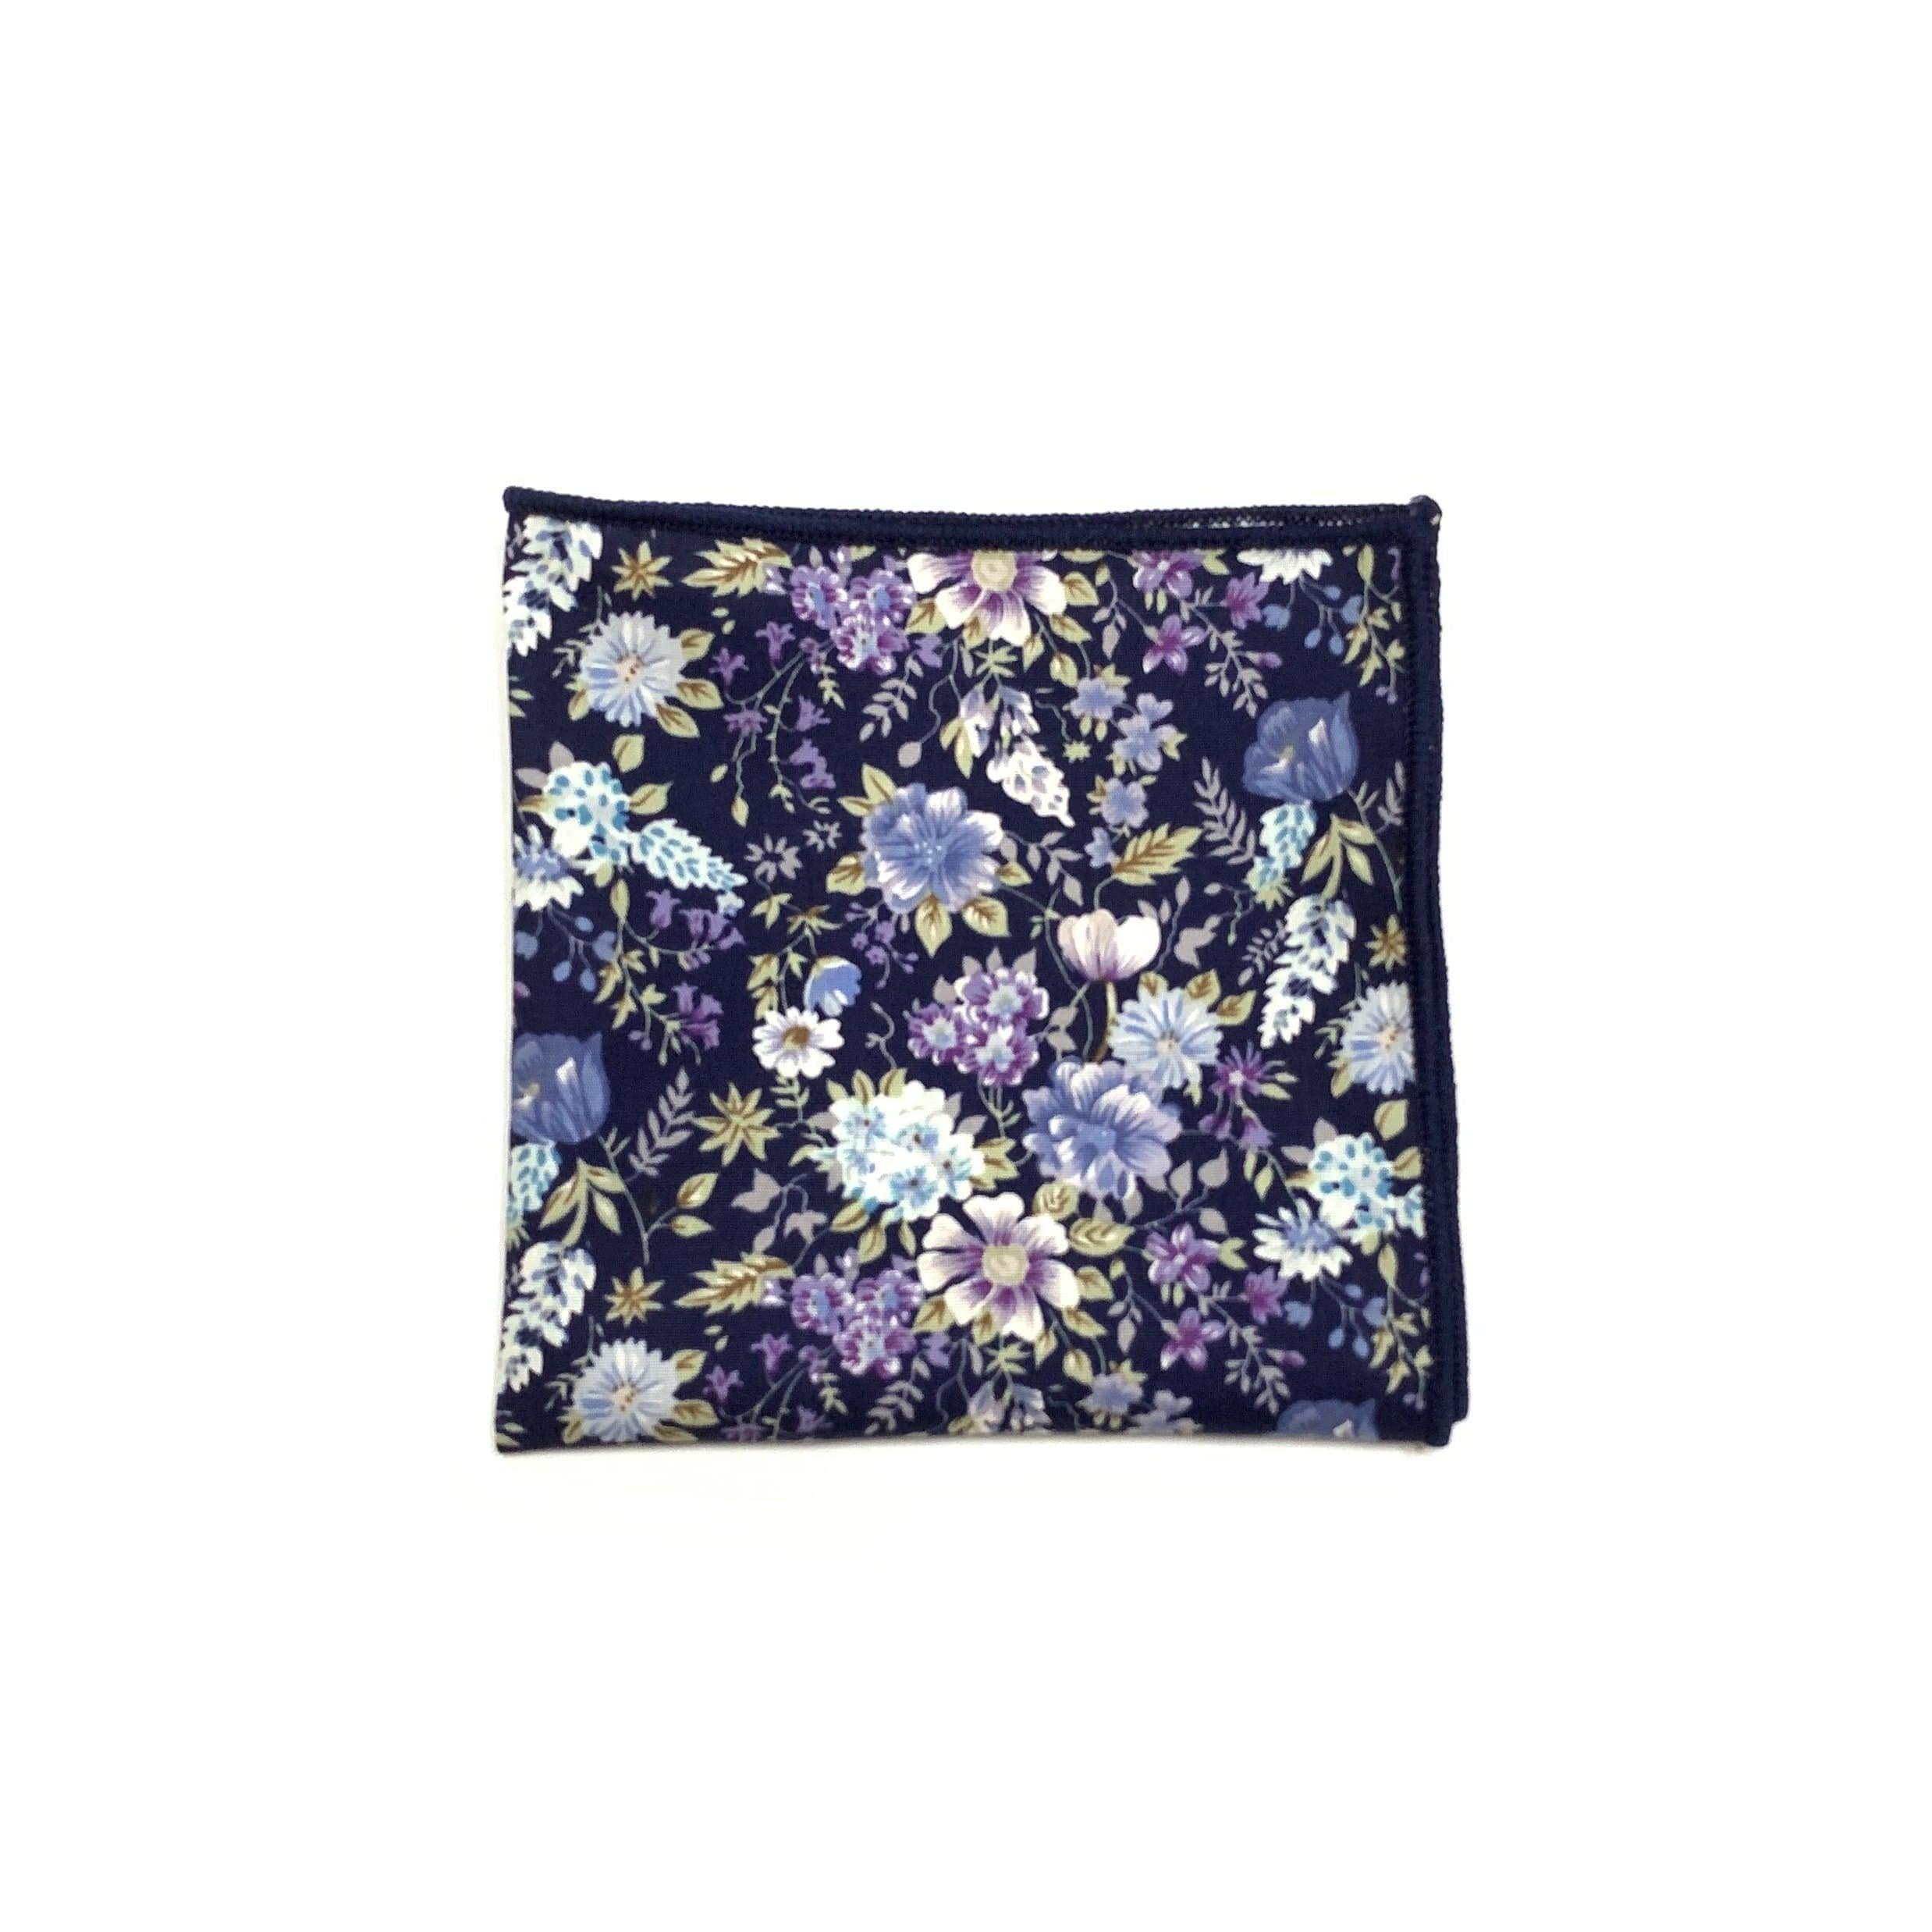 Purple Floral Pocket Square - Sweet Pea - Mytieshop Mytieshop Material CottonItem Length: 23 cm ( 9 inches)Item Width : 22 cm (8.6 inches) Base is Blue Great for: Groom Groomsmen Wedding Shoots Formal Prom Fancy Parties Gifts and presents A dashing addition to any formal outfit. A purple pocket square with a sweet floral design, this piece is perfect for adding a touch of personality to any suit or tuxedo. Class up your look with this dapper accessory. Whether you're wearing it to a wedding or j